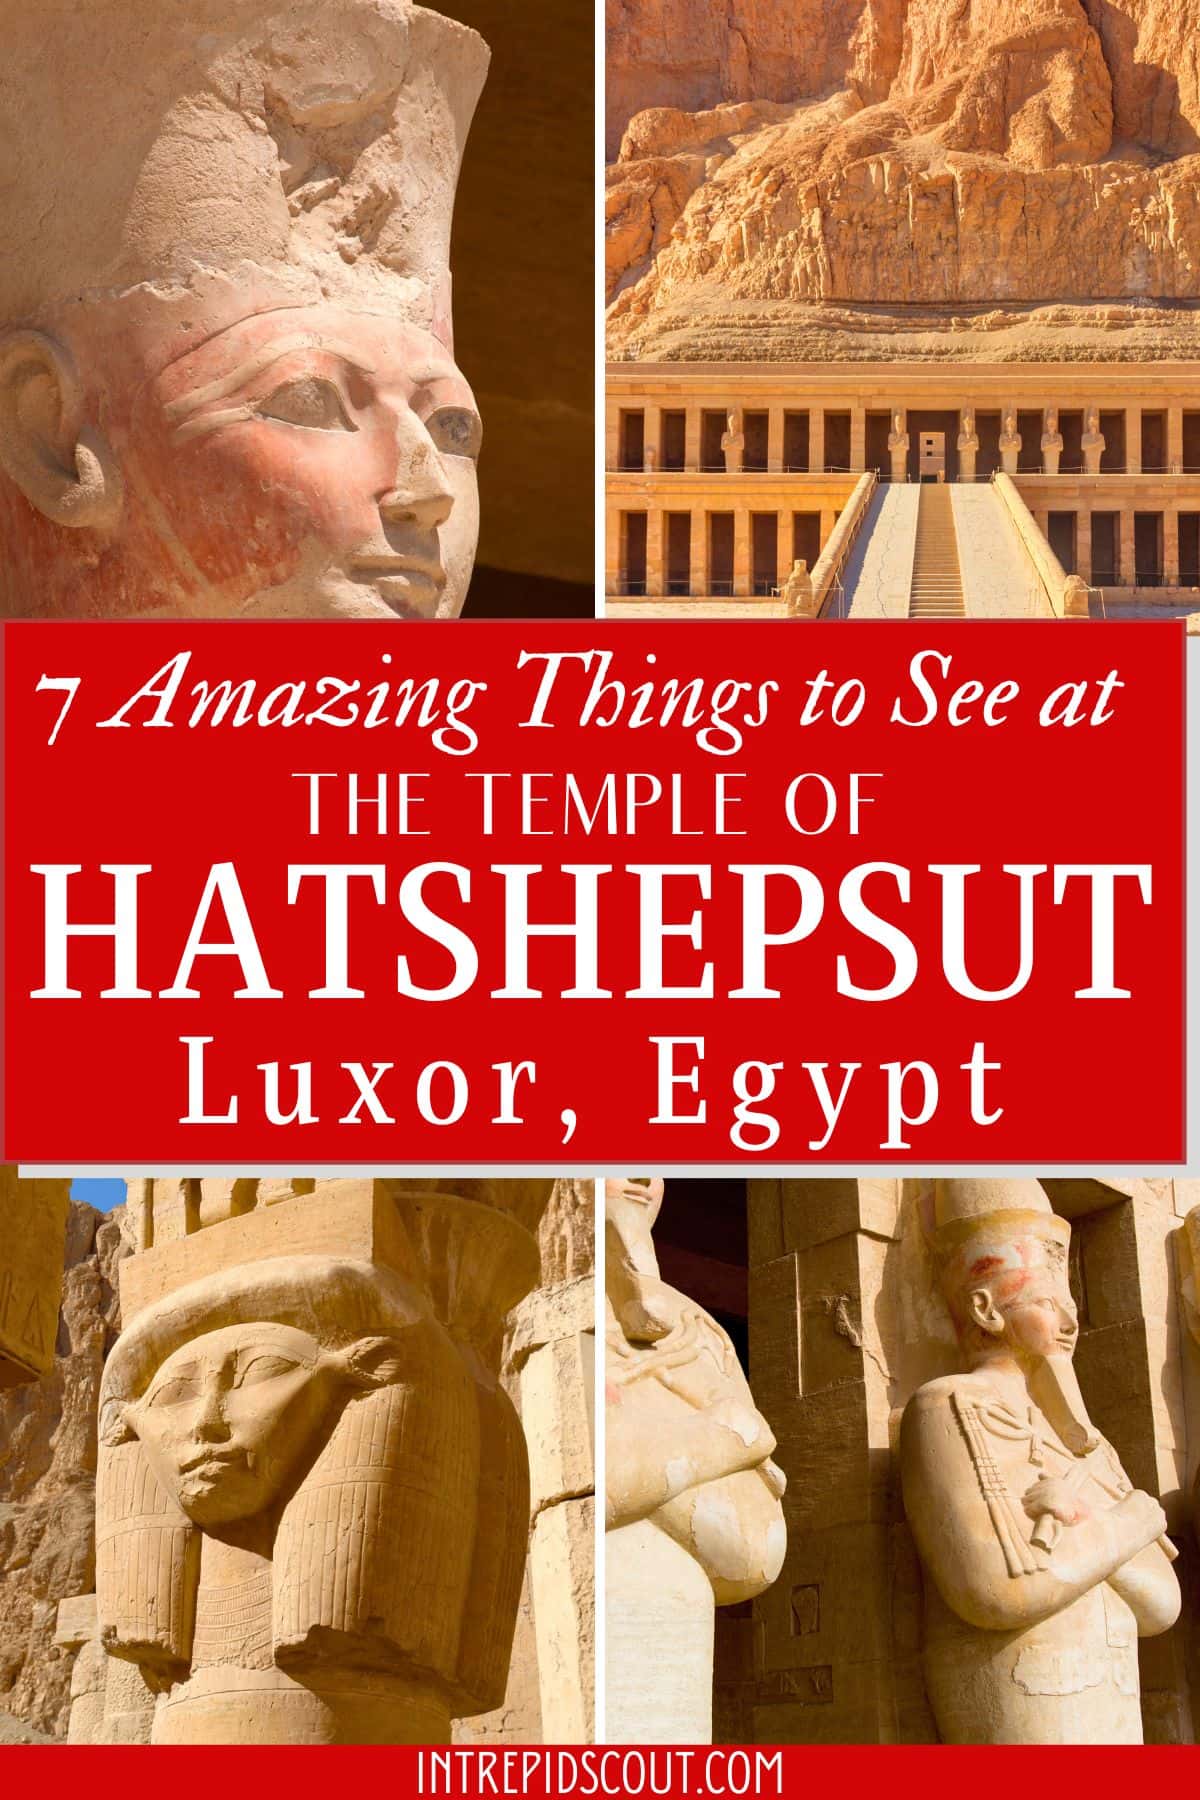 Things to See at the Temple of Hatshepsut